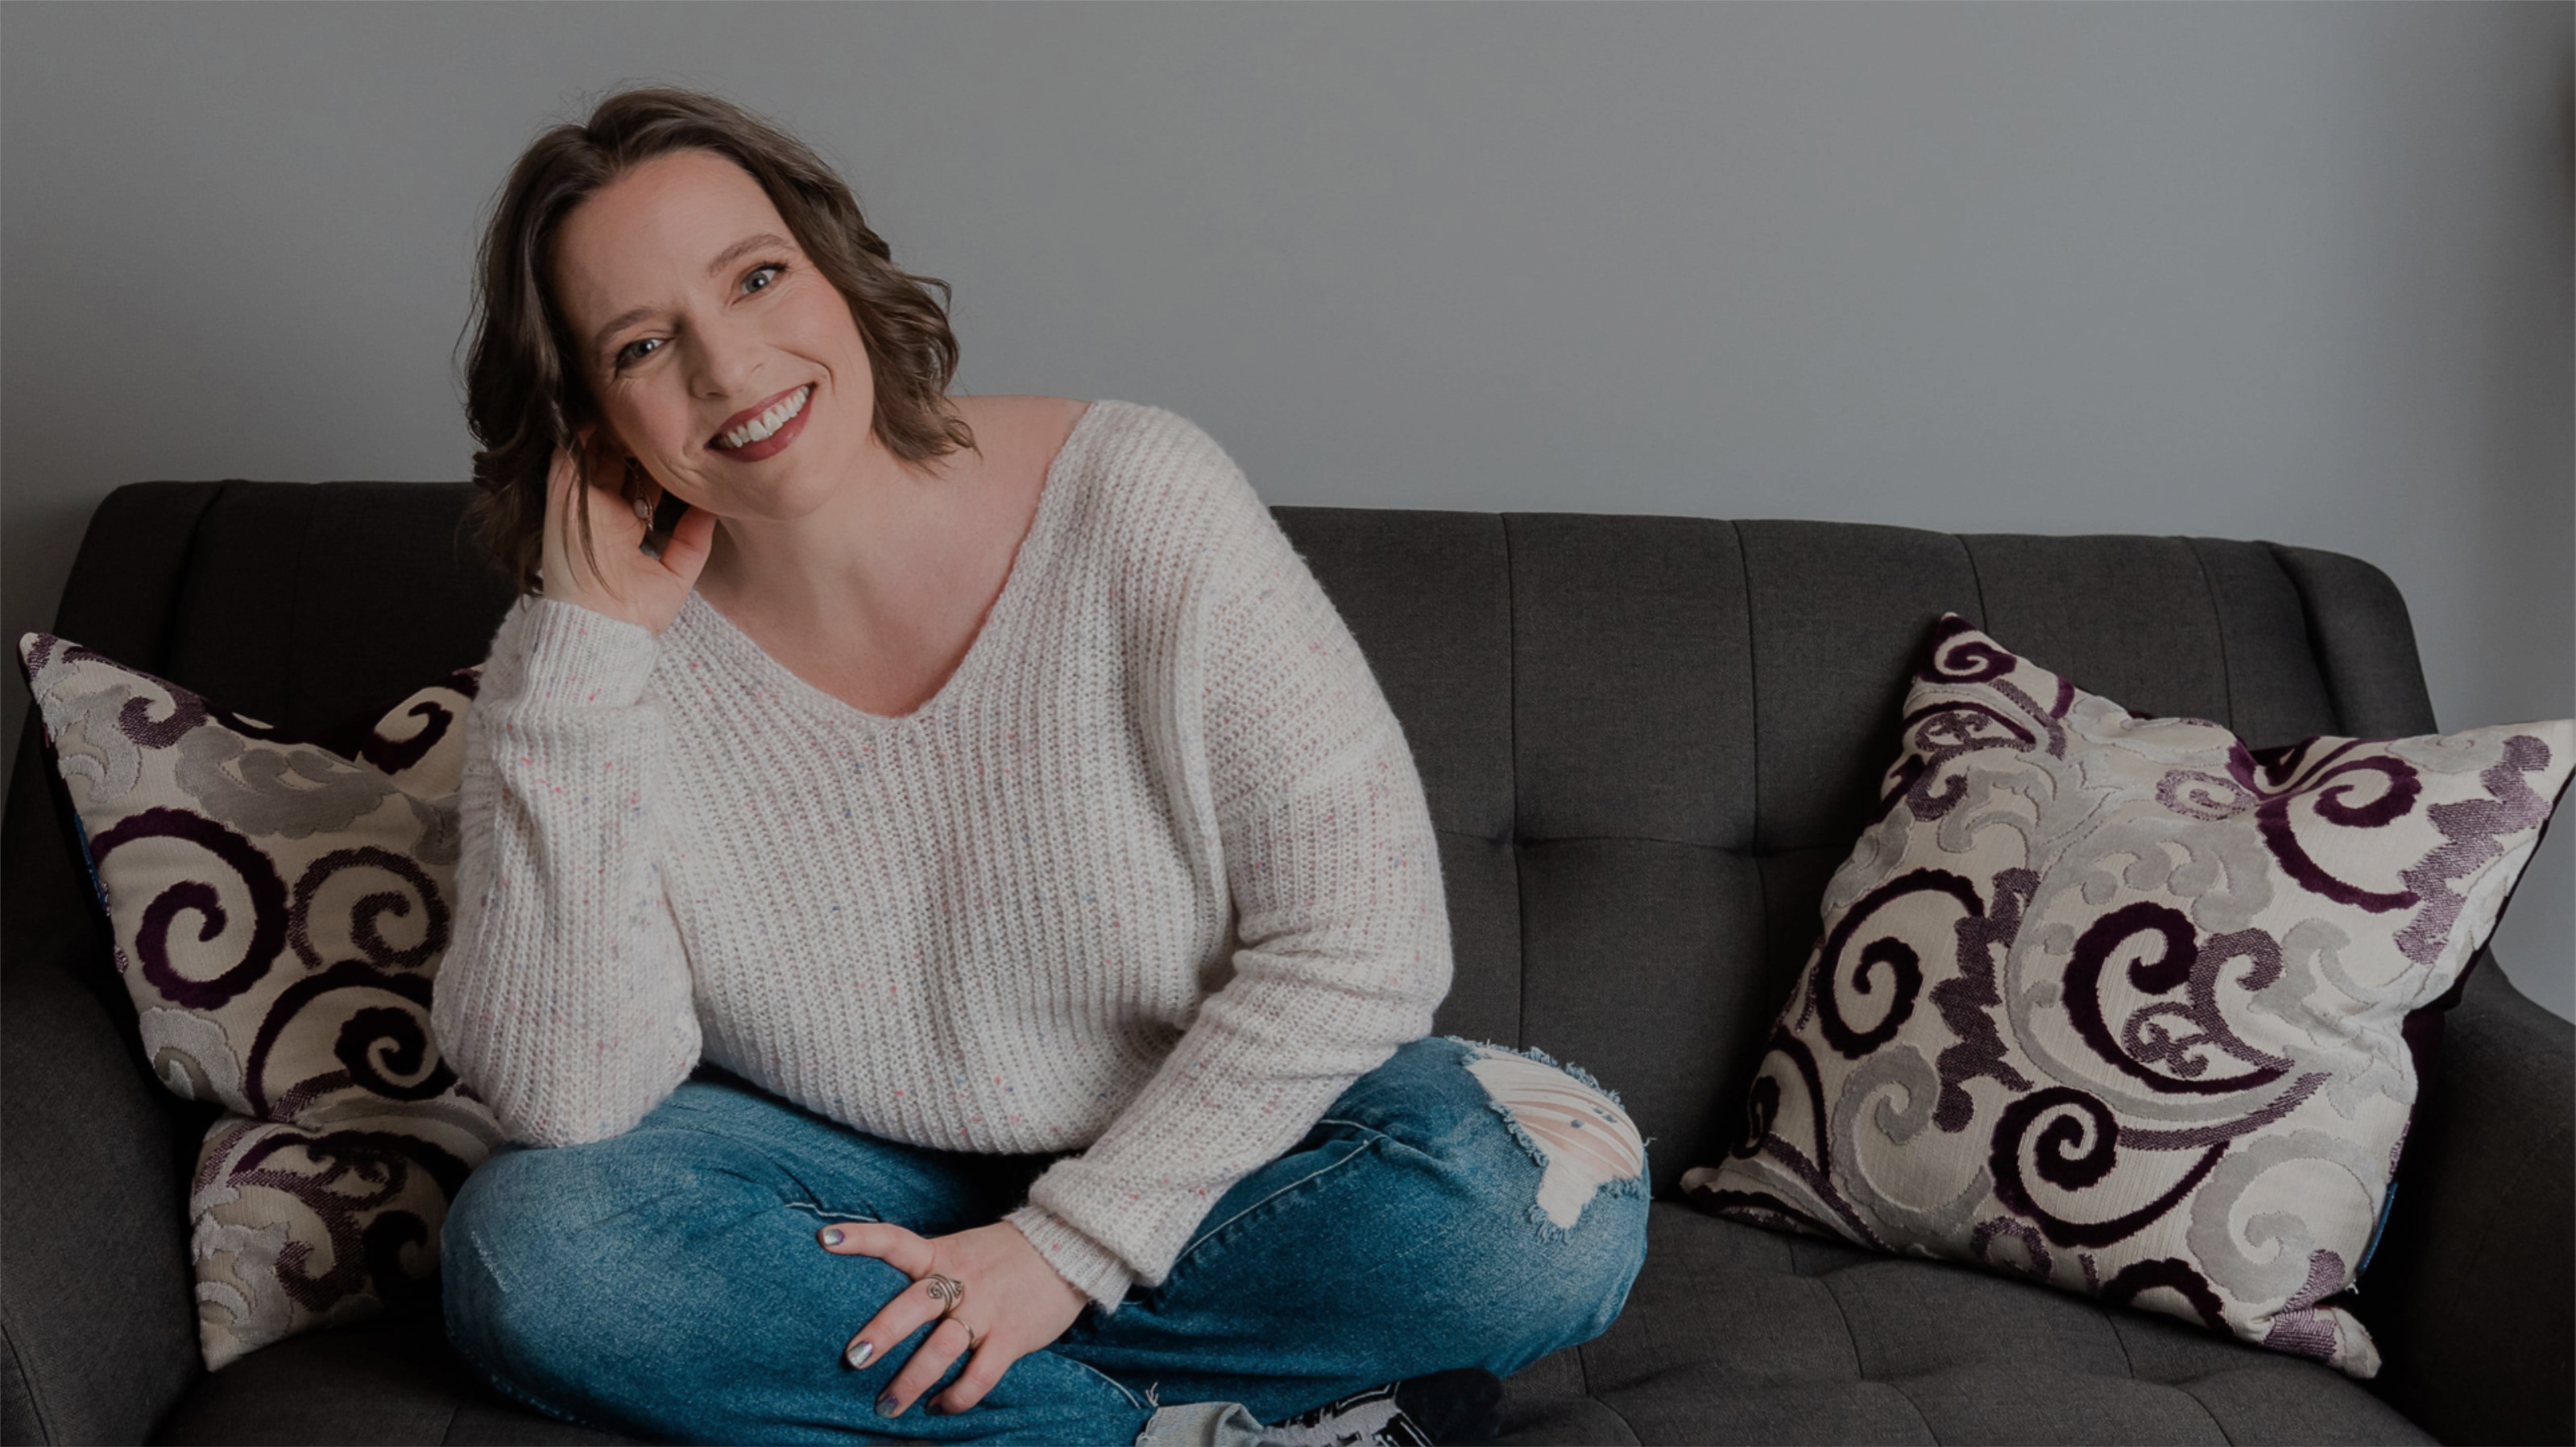 Middle aged woman casualy sitting on a dark colored sofa with two decrative pillows. Wearing faded jeans and oversized sweater and smiling.